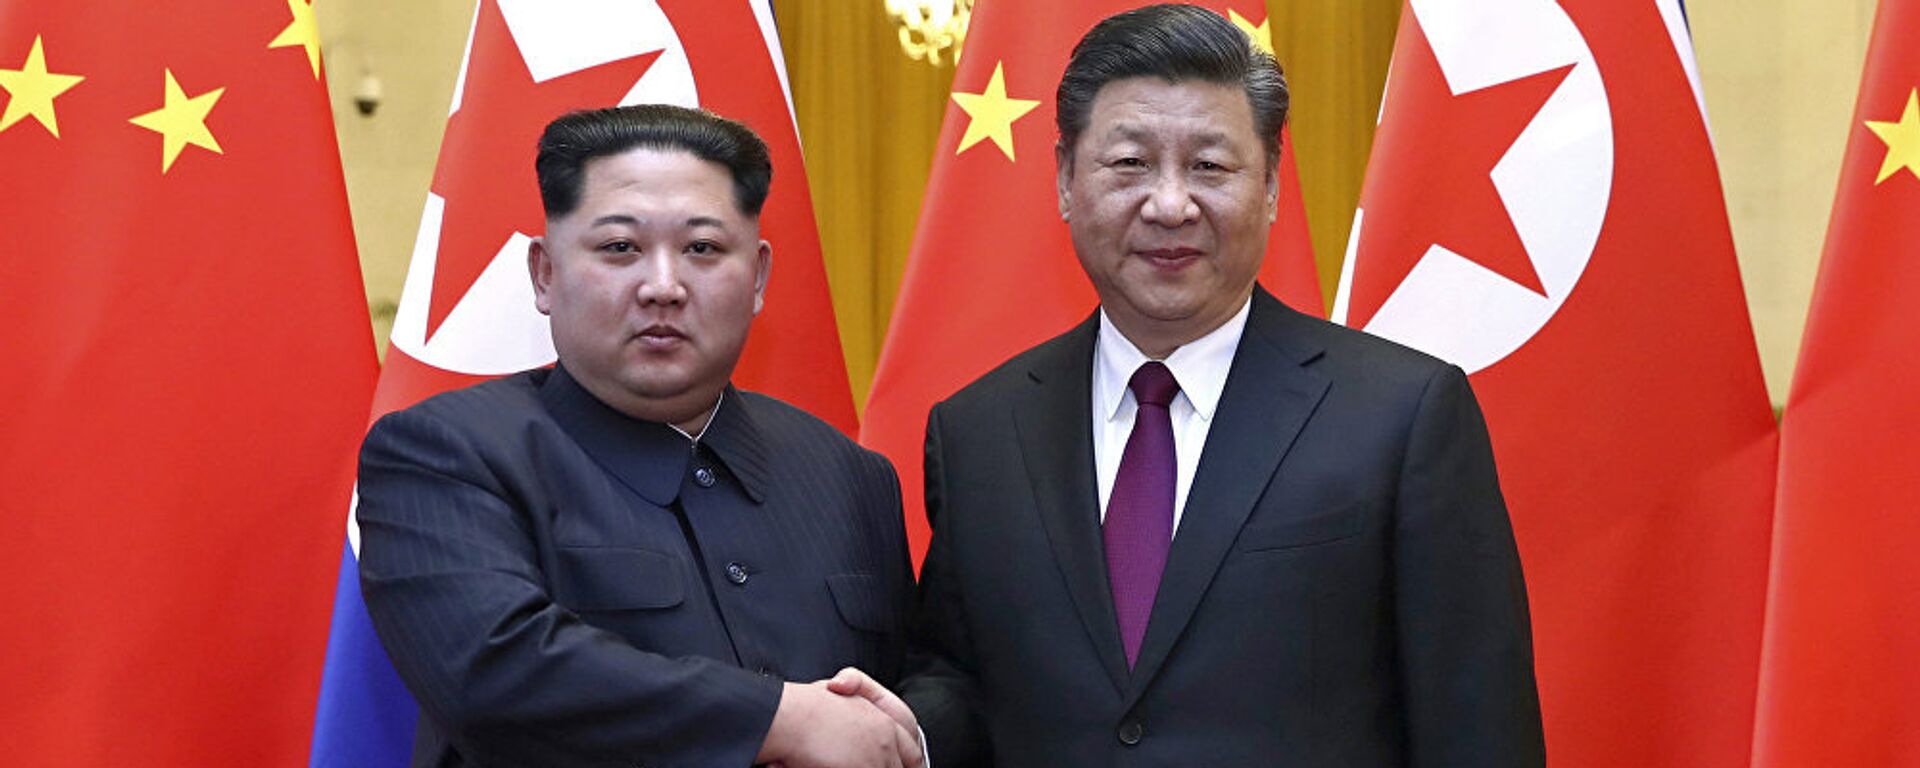 North Korean leader Kim Jong Un, left, and Chinese President Xi Jinping shake hands in Beijing, China. - 俄羅斯衛星通訊社, 1920, 30.07.2021